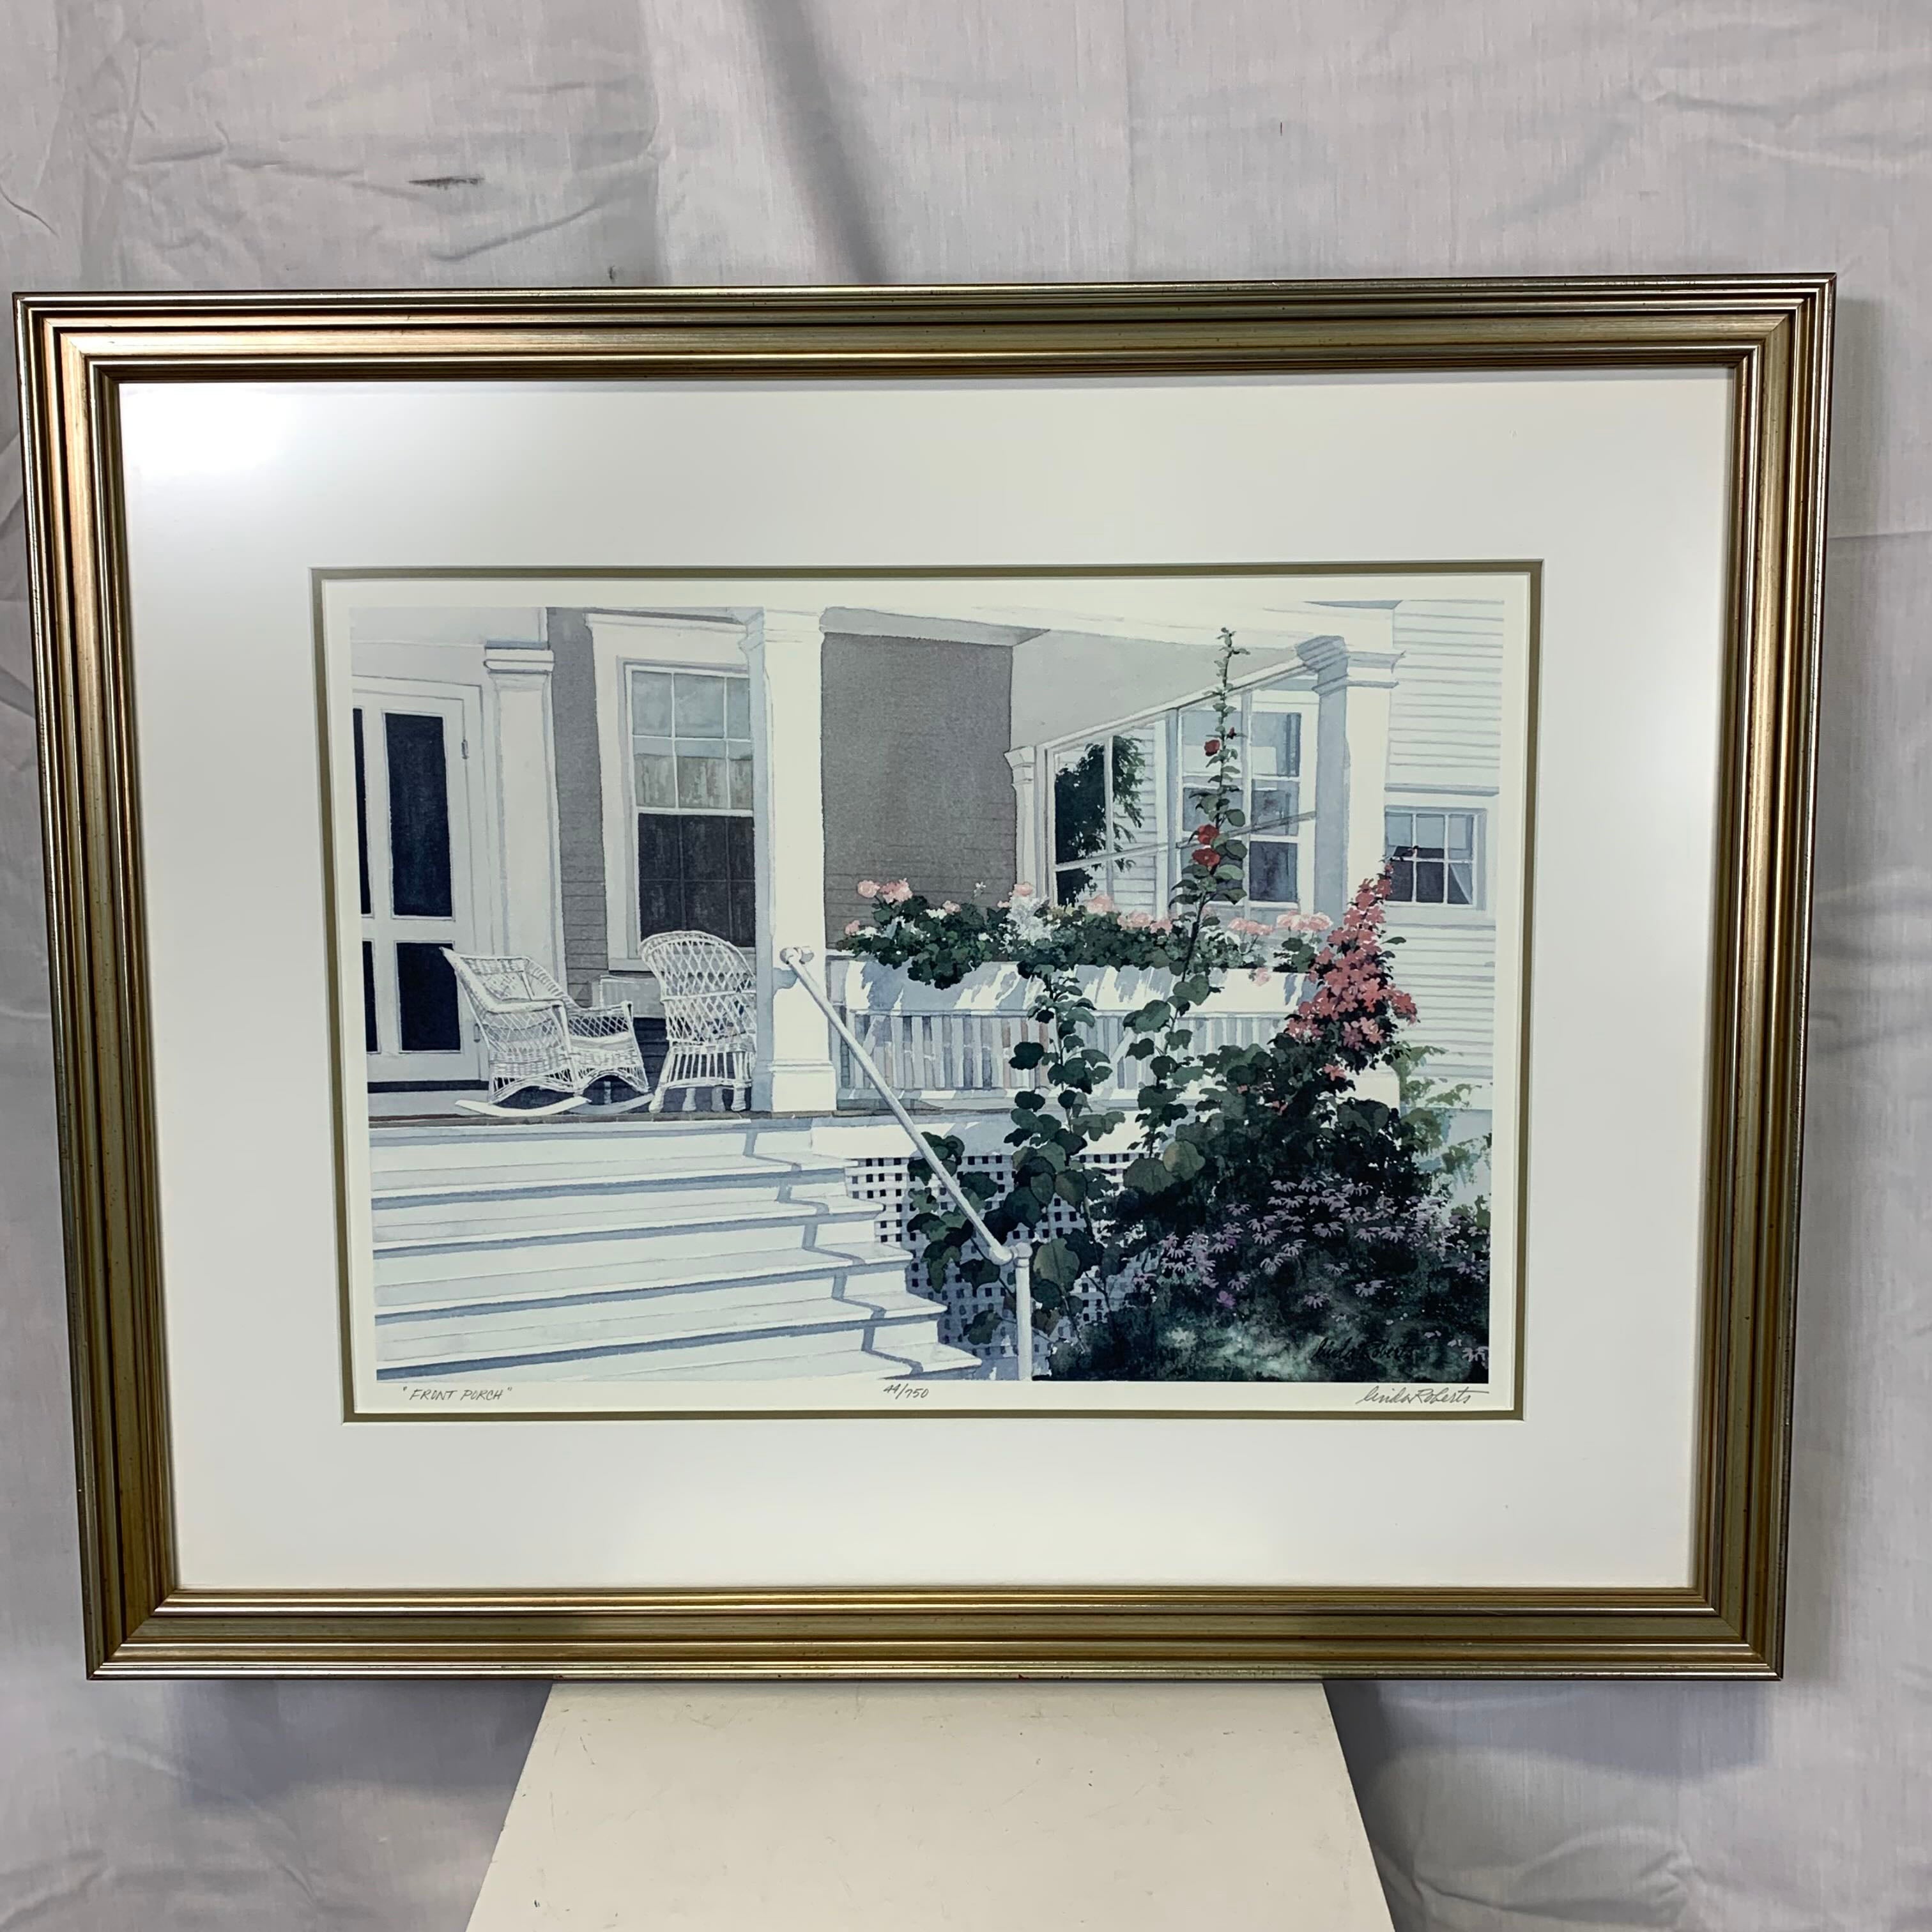 26.5"x 21.5" Front Porch by Linda Roberts Framed and Signed Print